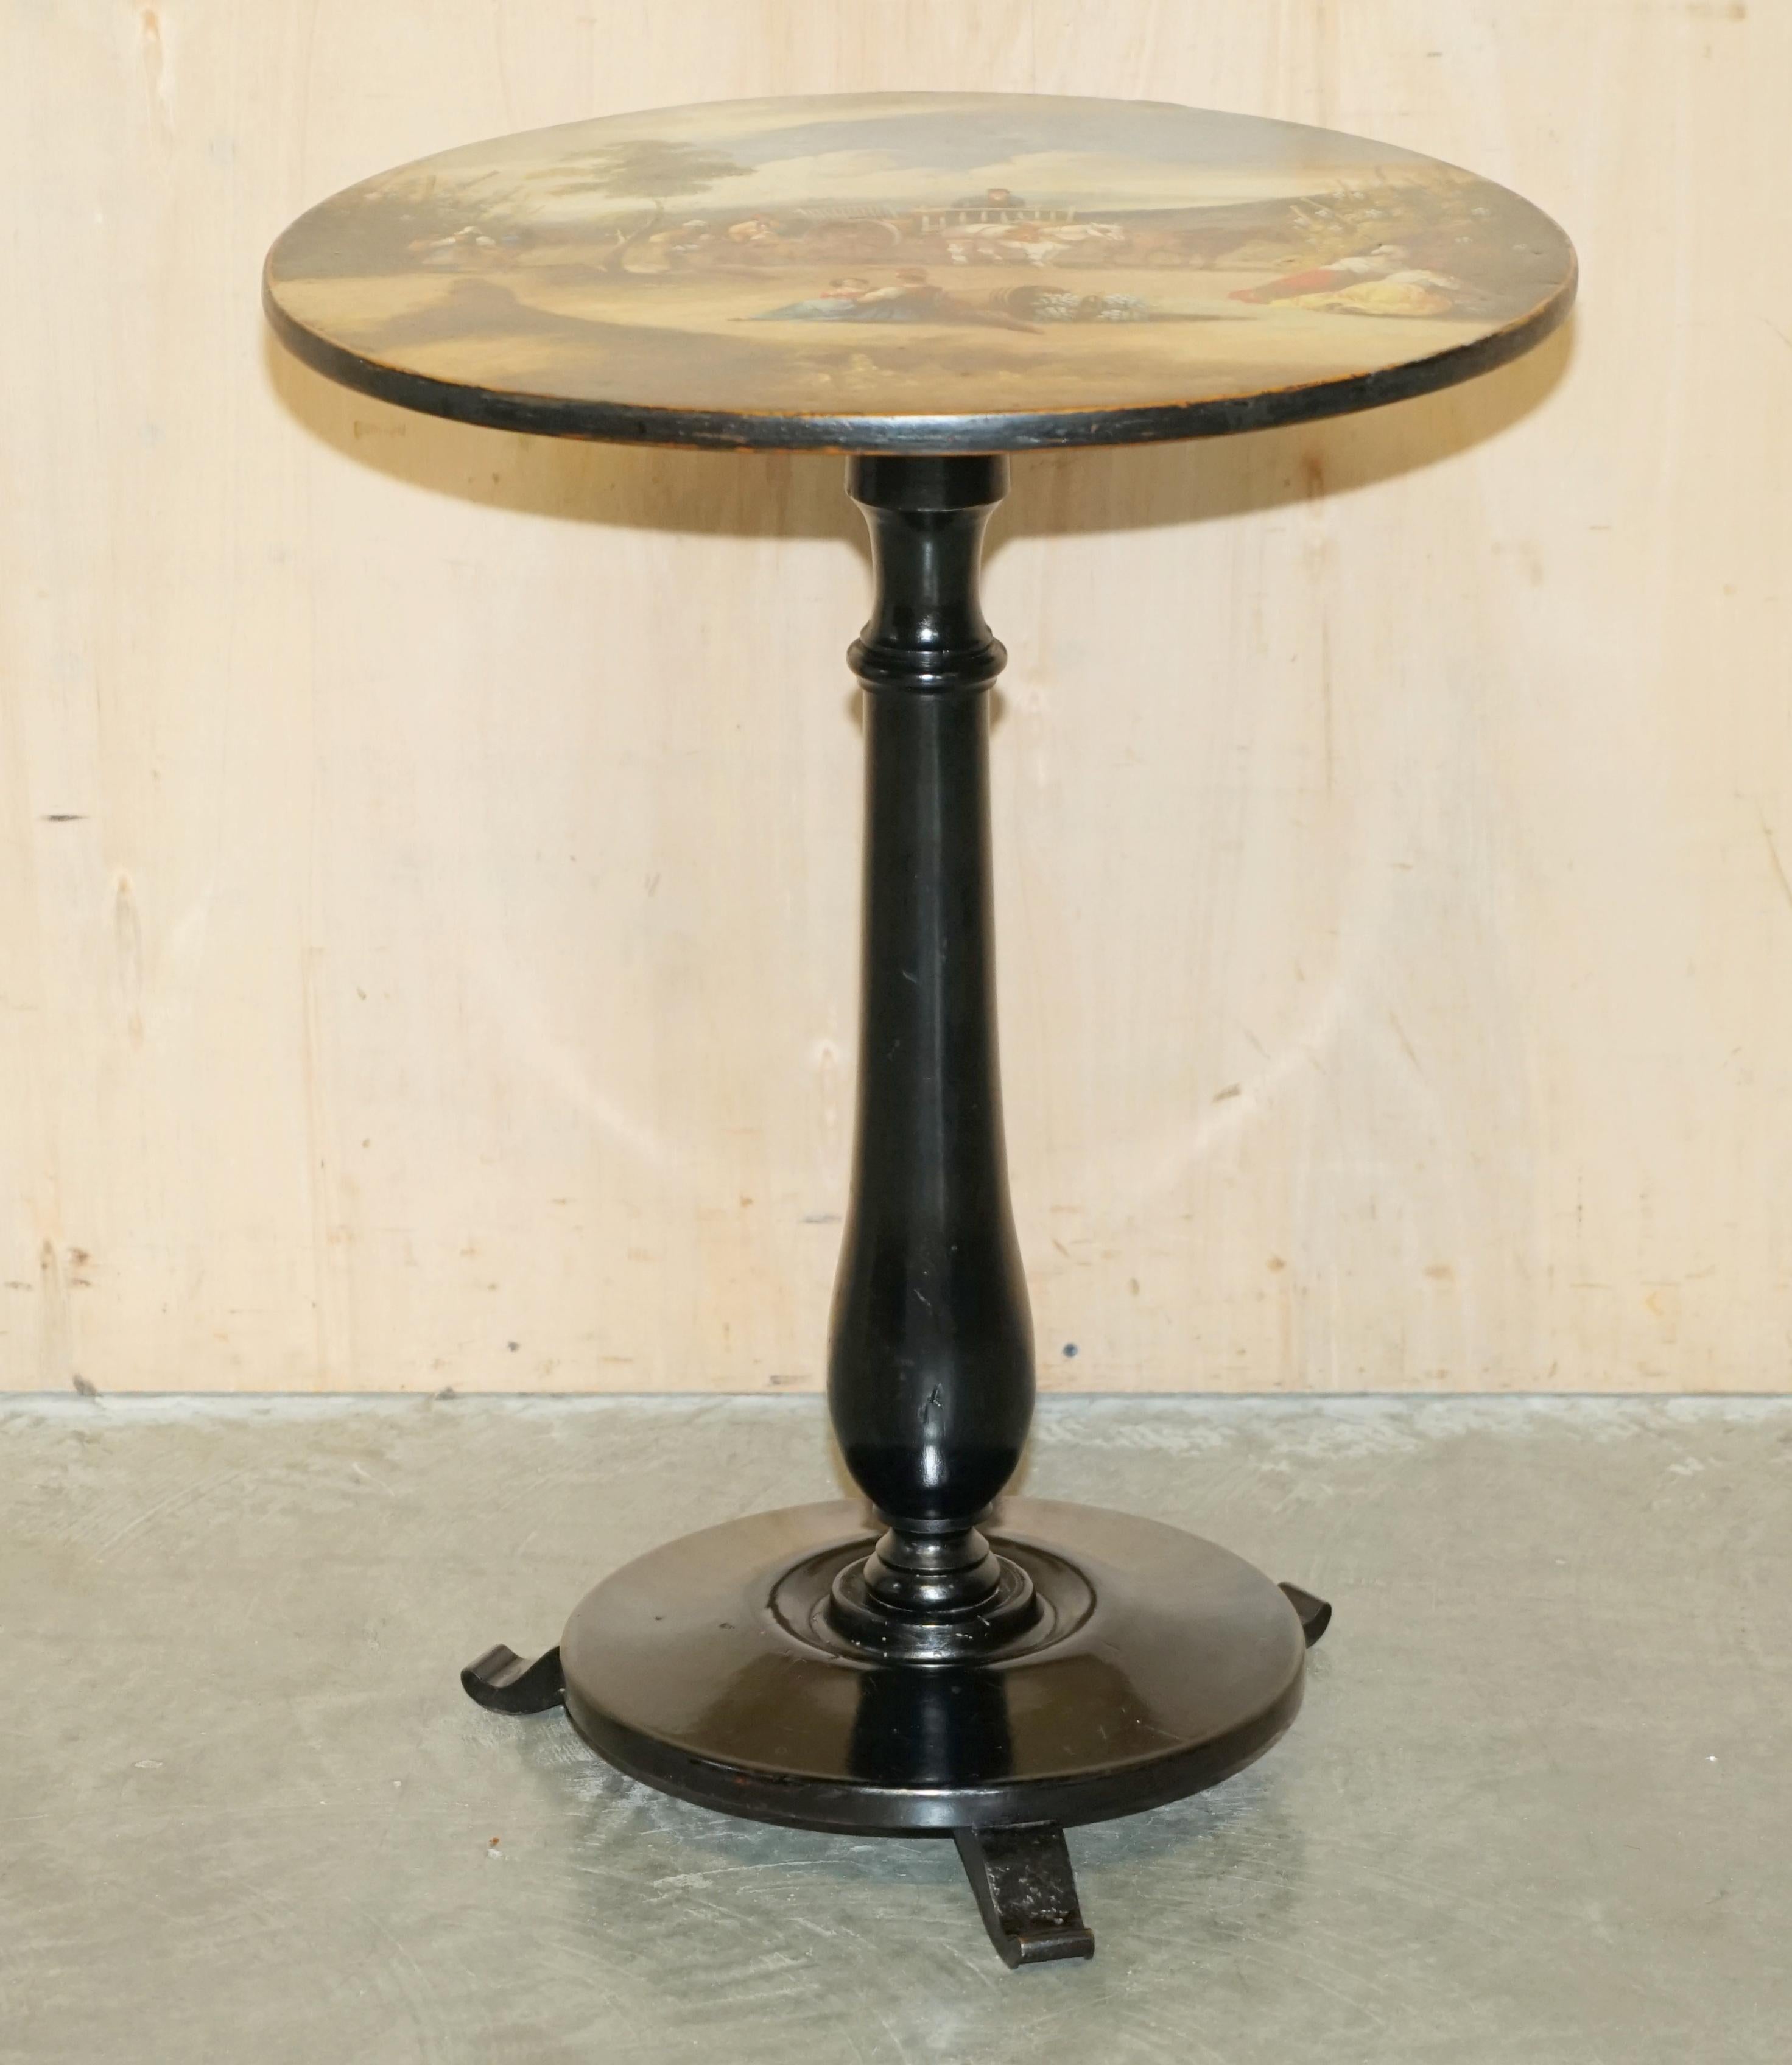 Royal House Antiques

Royal House Antiques is delighted to offer for sale this super decorative hand painted occasional table with ebonised base

Please note the delivery fee listed is just a guide, it covers within the M25 only for the UK and local